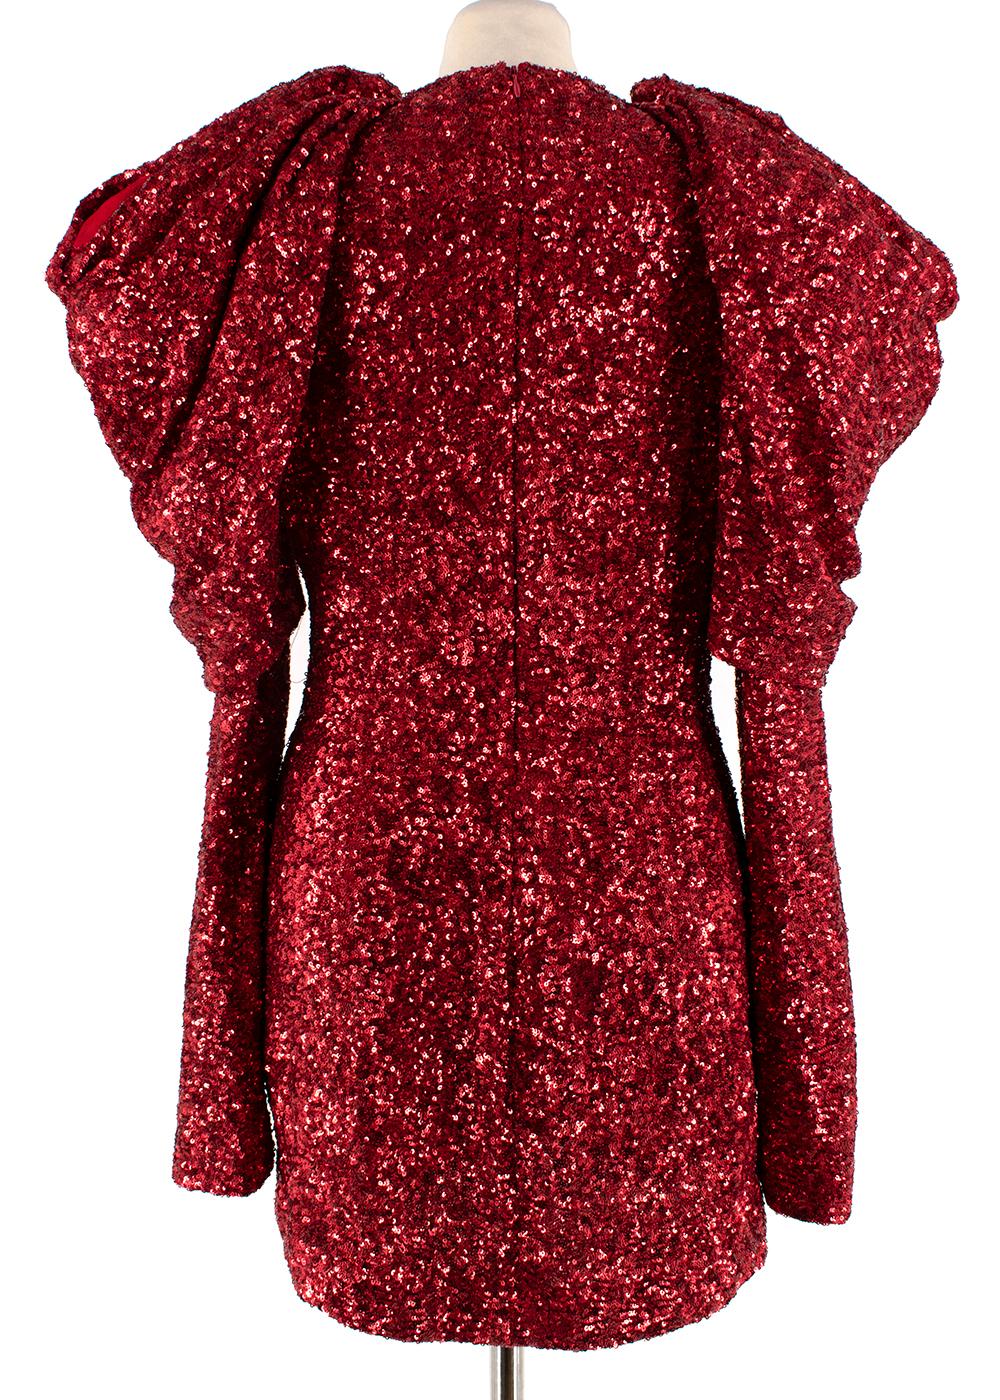 Redemption Draped Sequined Chiffon Mini Dress - Size US 8 In Excellent Condition For Sale In London, GB